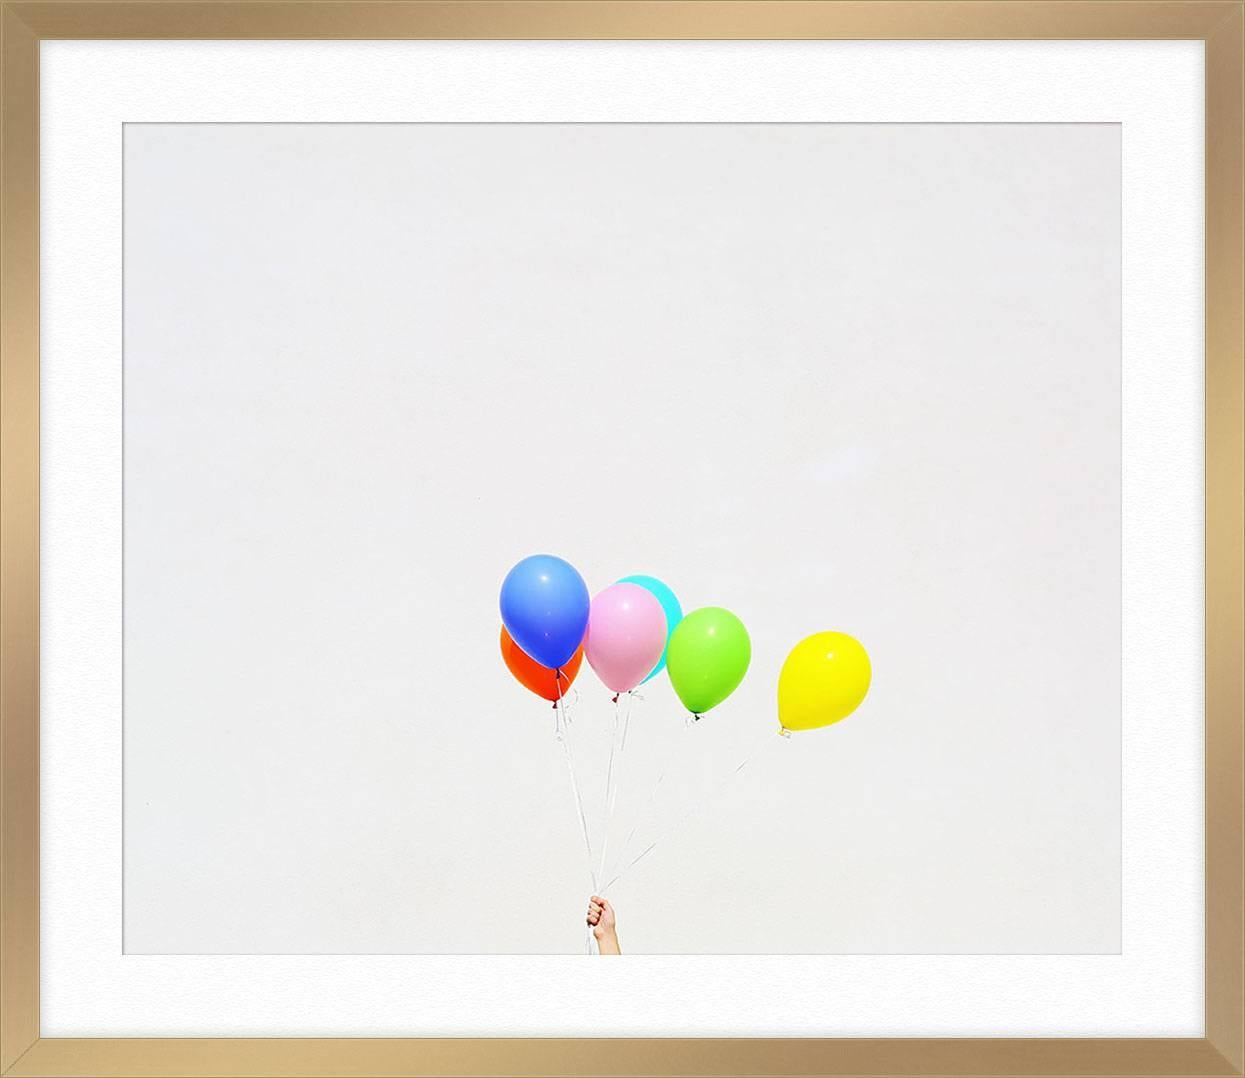 Untitled (Balloons) 4